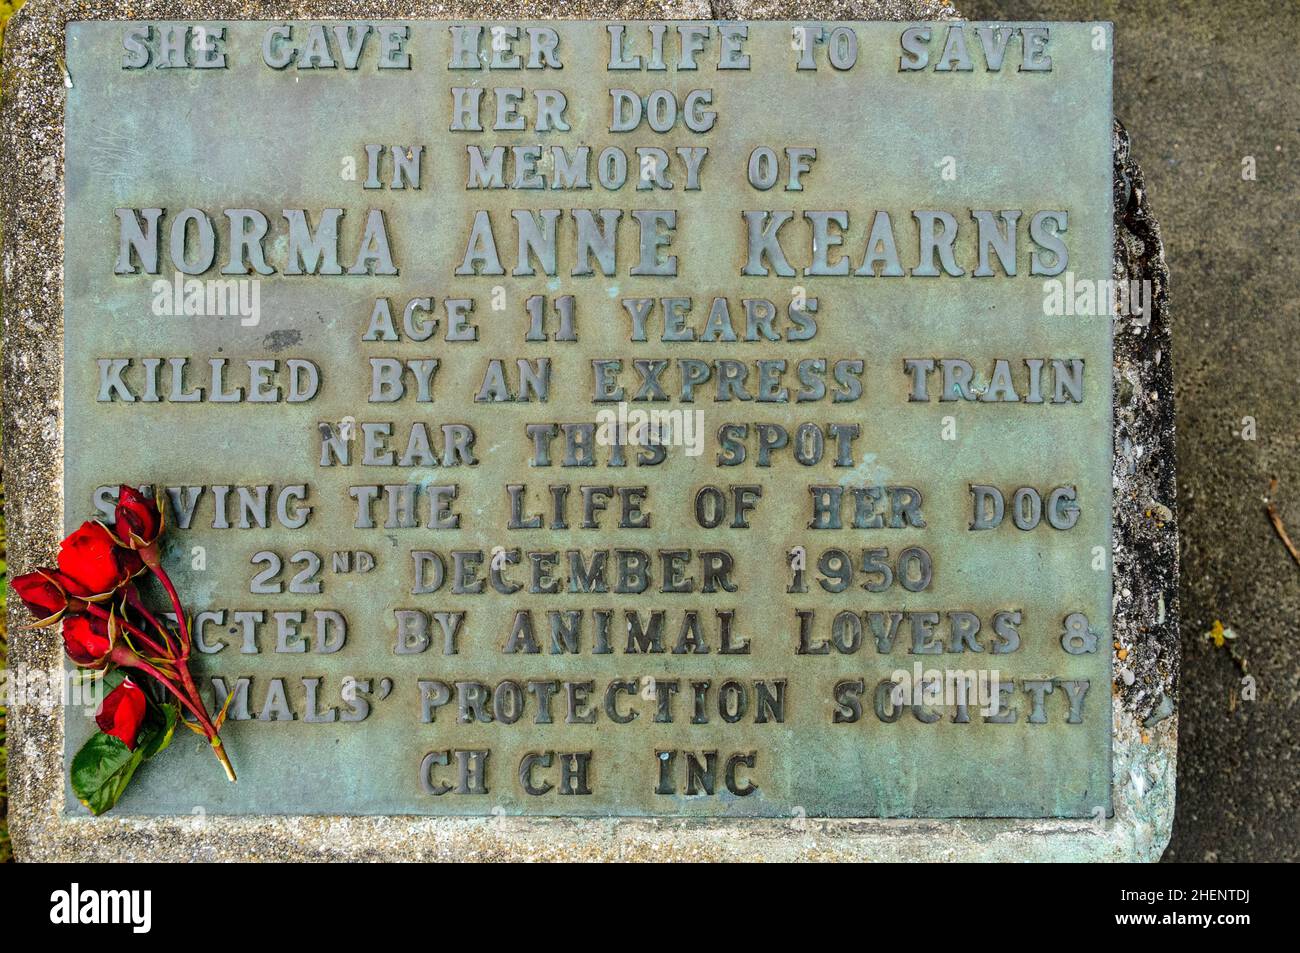 Plaque for the tragic death of Norma Anne Kearns age 11 years killed by train saving the life of her dog 22 December 1950. Oamaru New Zealand Stock Photo